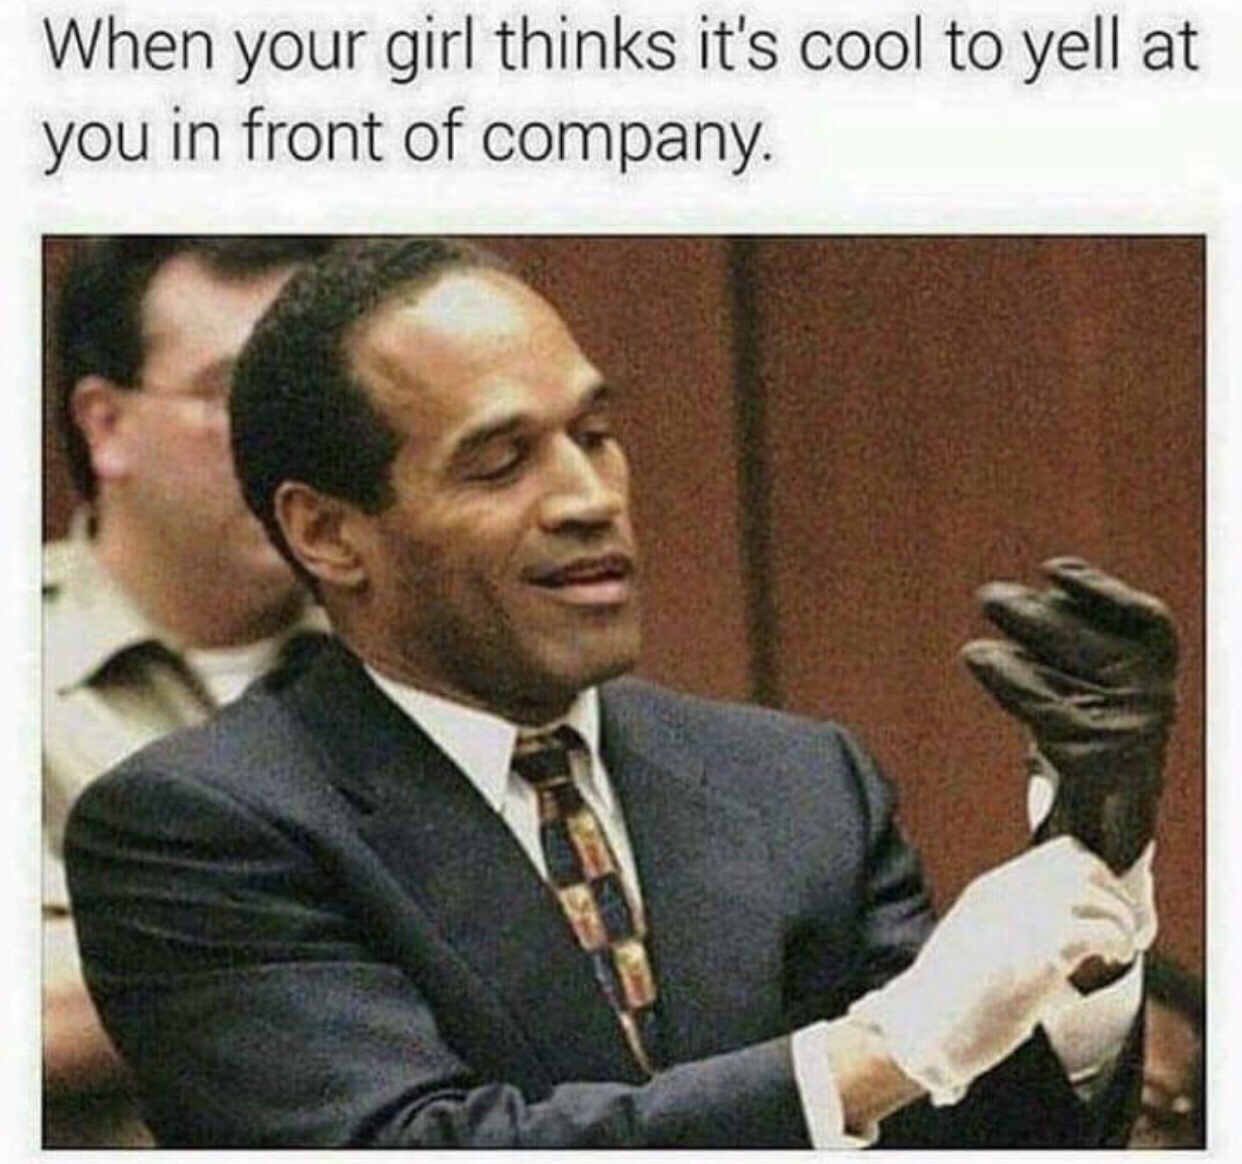 oj simpson trial - When your girl thinks it's cool to yell at you in front of company.